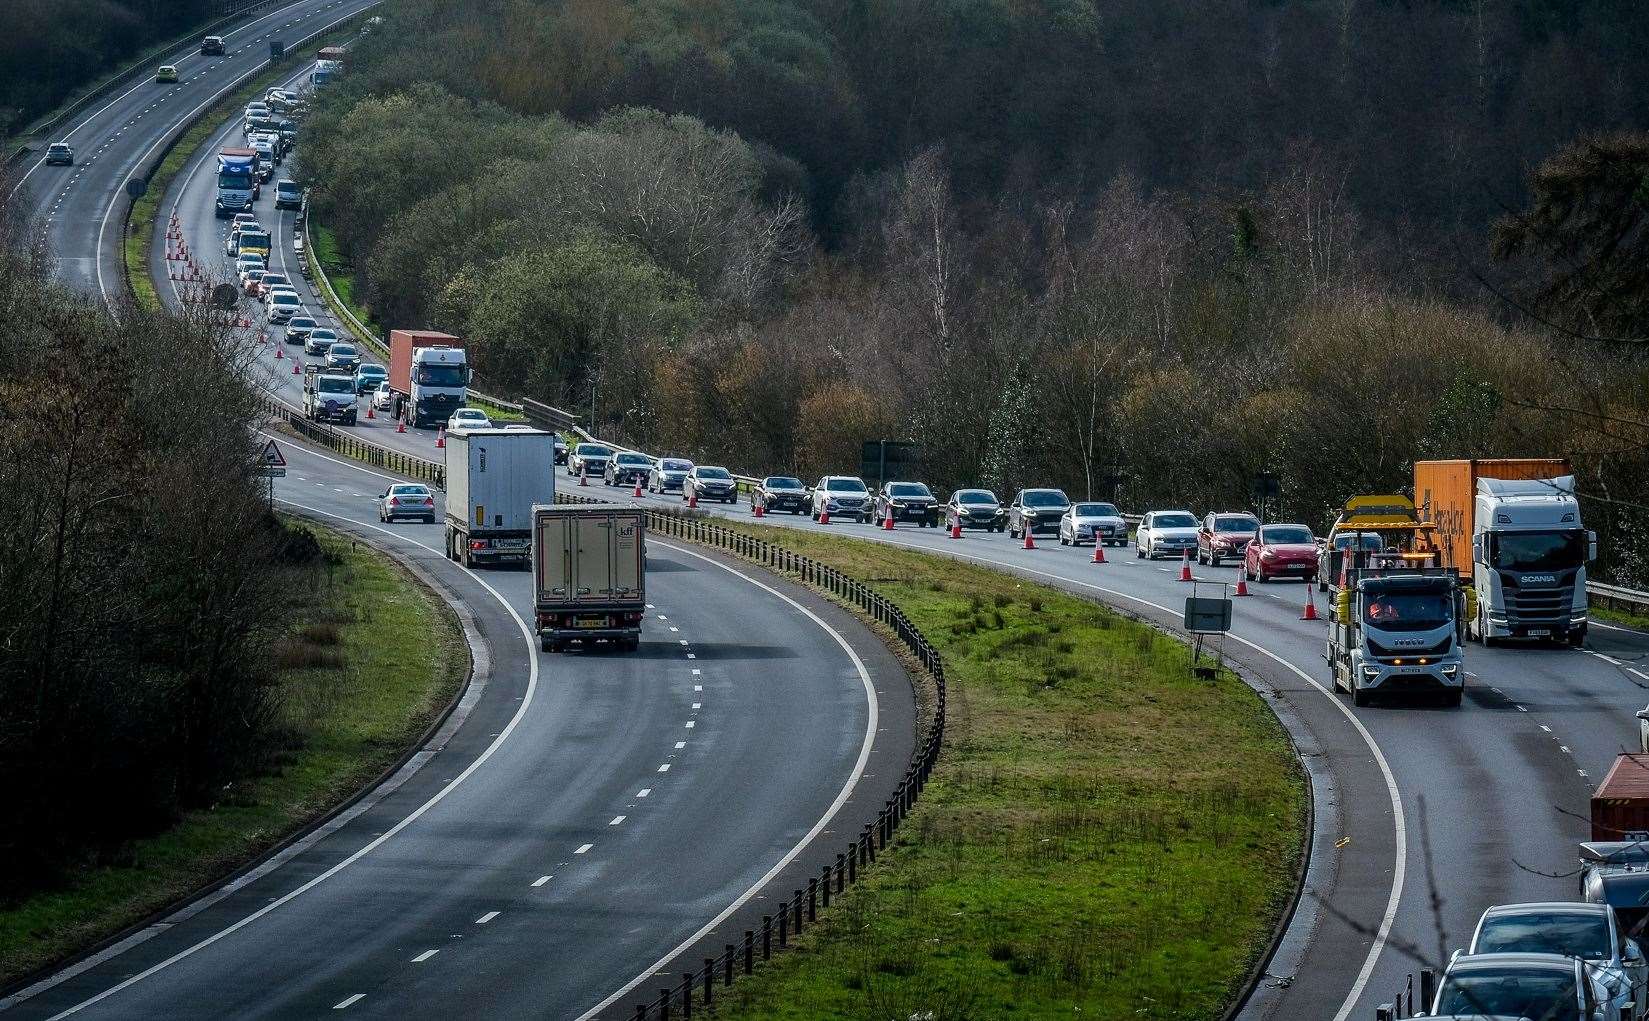 The longer lorries will be permitted on UK roads from the end of May